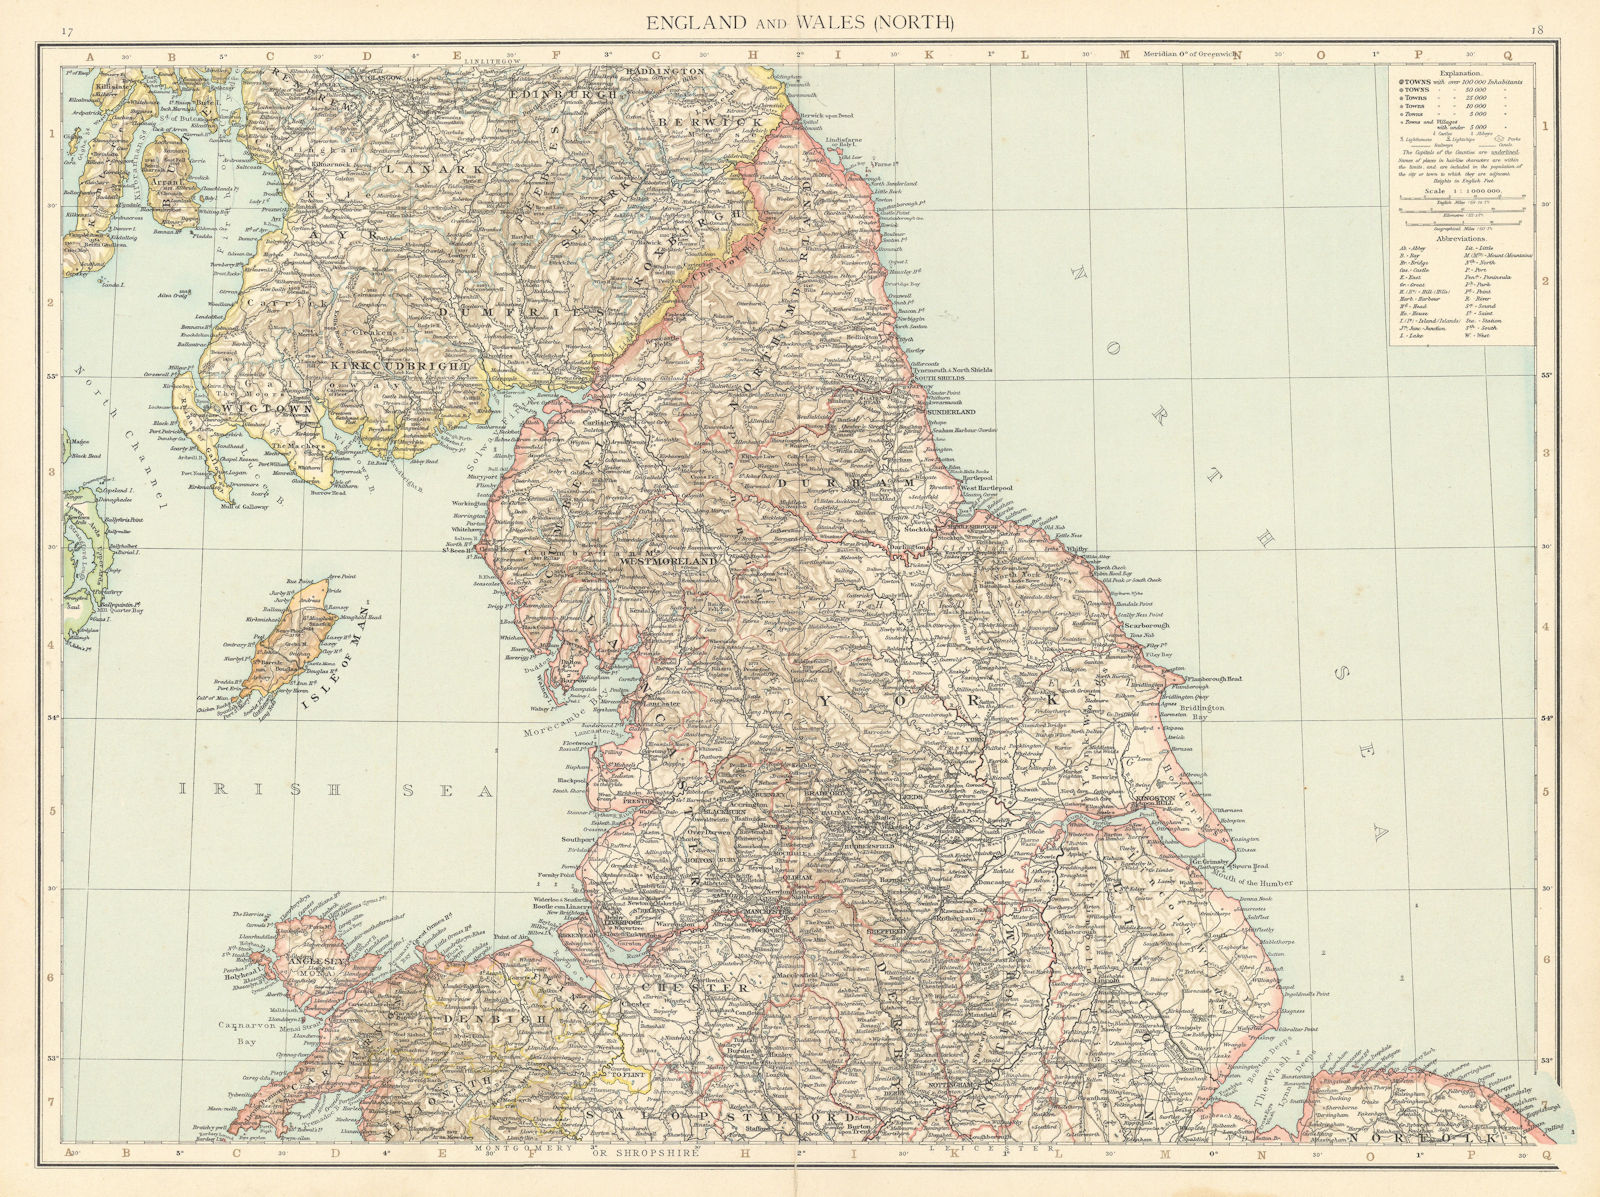 England & Wales North. Yorkshire Lancashire Cumbria Lincs. THE TIMES 1895 map